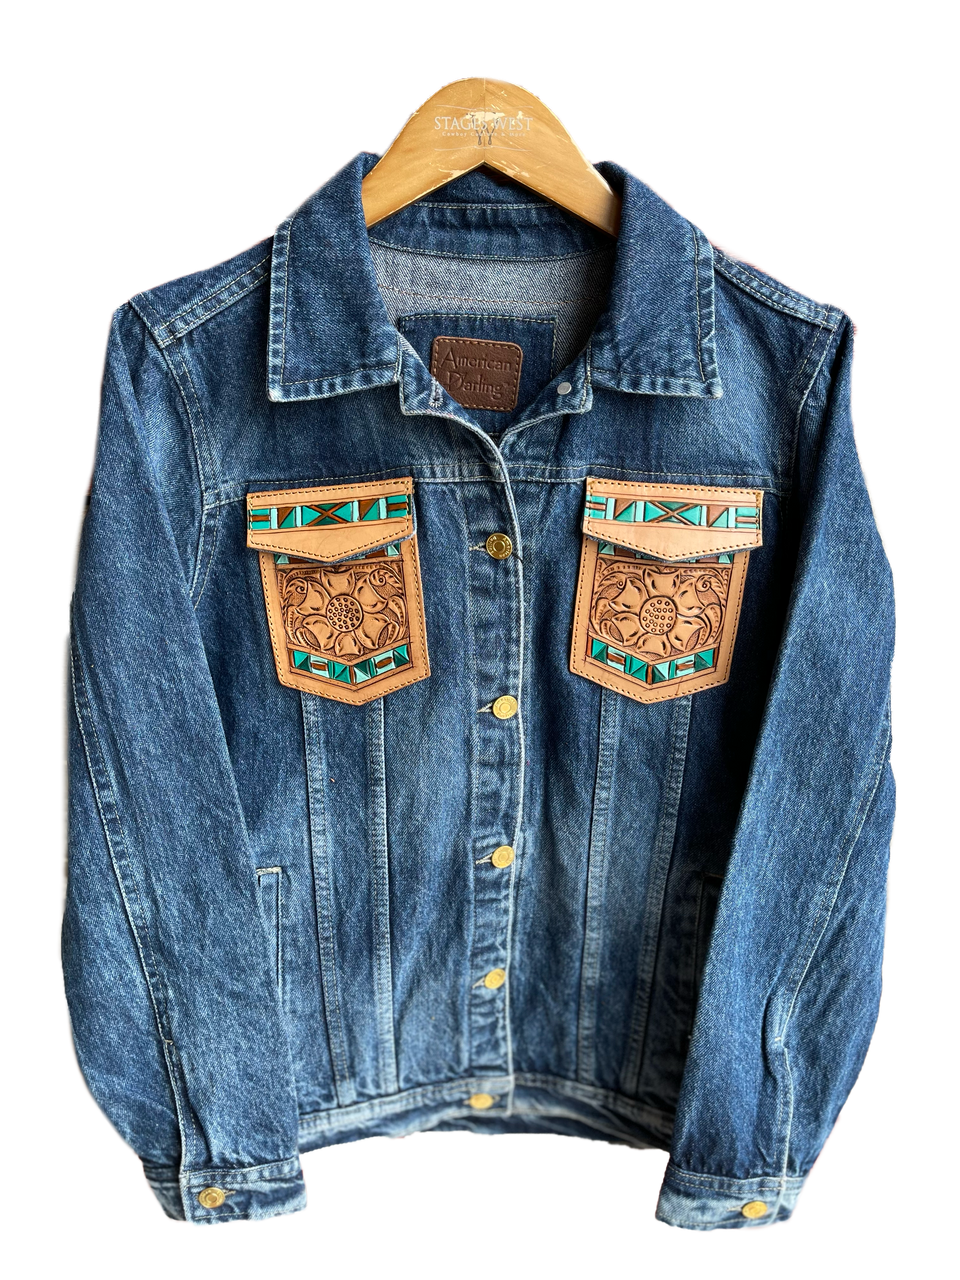 Tooled Jean Jacket  Denim jacket patches, Leather working patterns,  Applique jeans